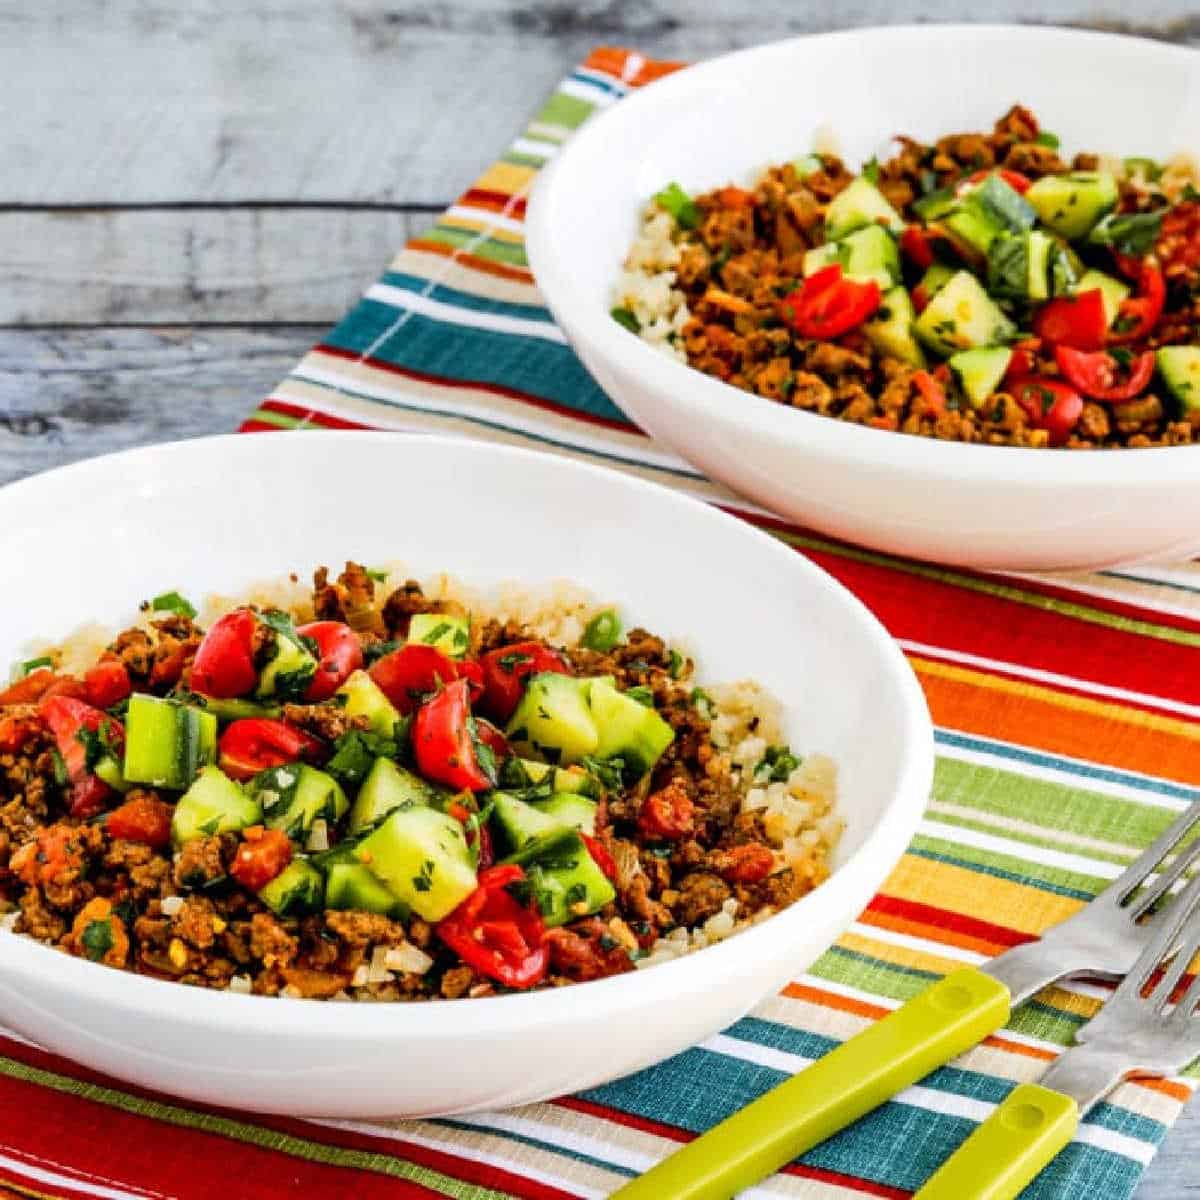 Middle Eastern Ground Beef Bowls shown in two bowls on napkin with green forks.